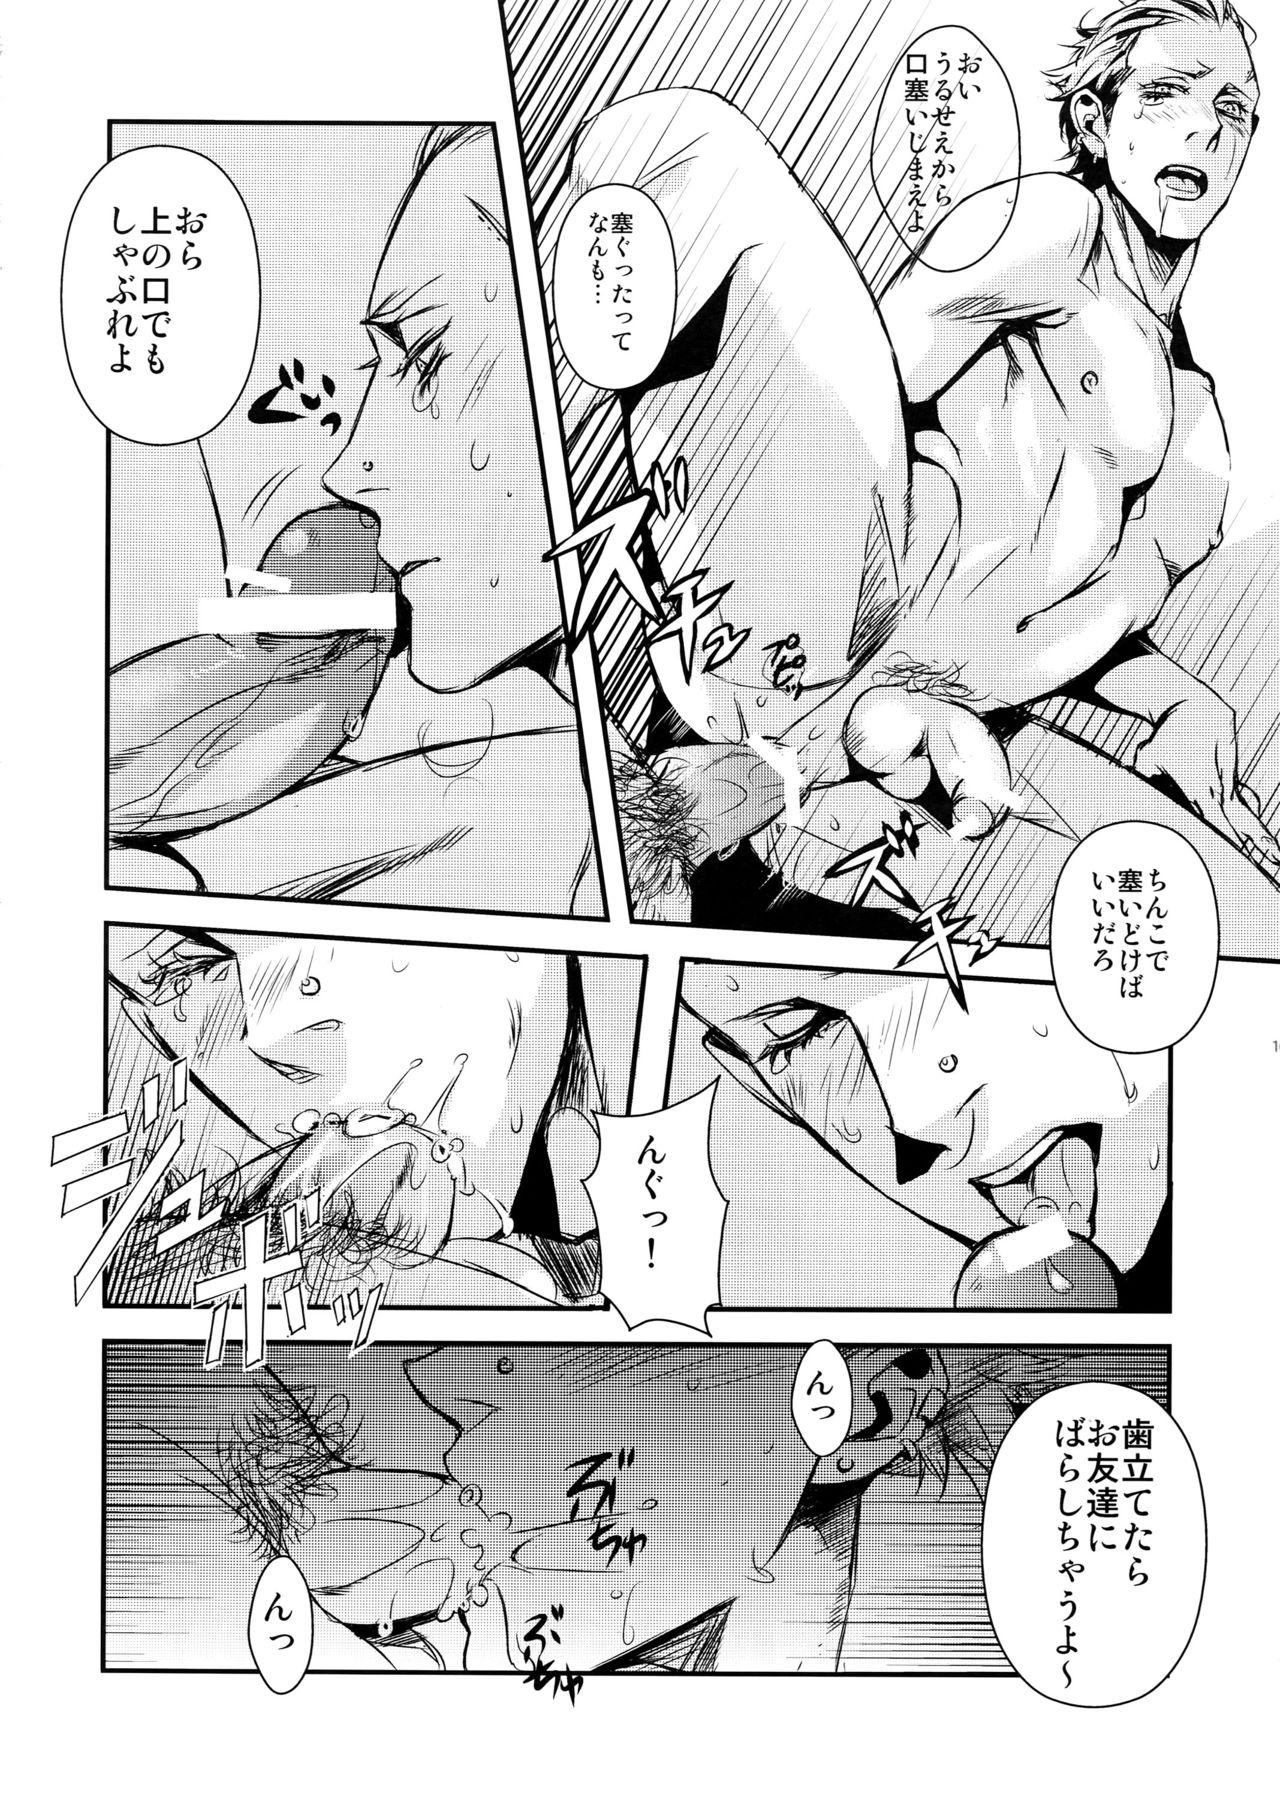 Couple Sex night has become a sunny dawn because of you - Persona 4 Shin megami tensei Jav - Page 9